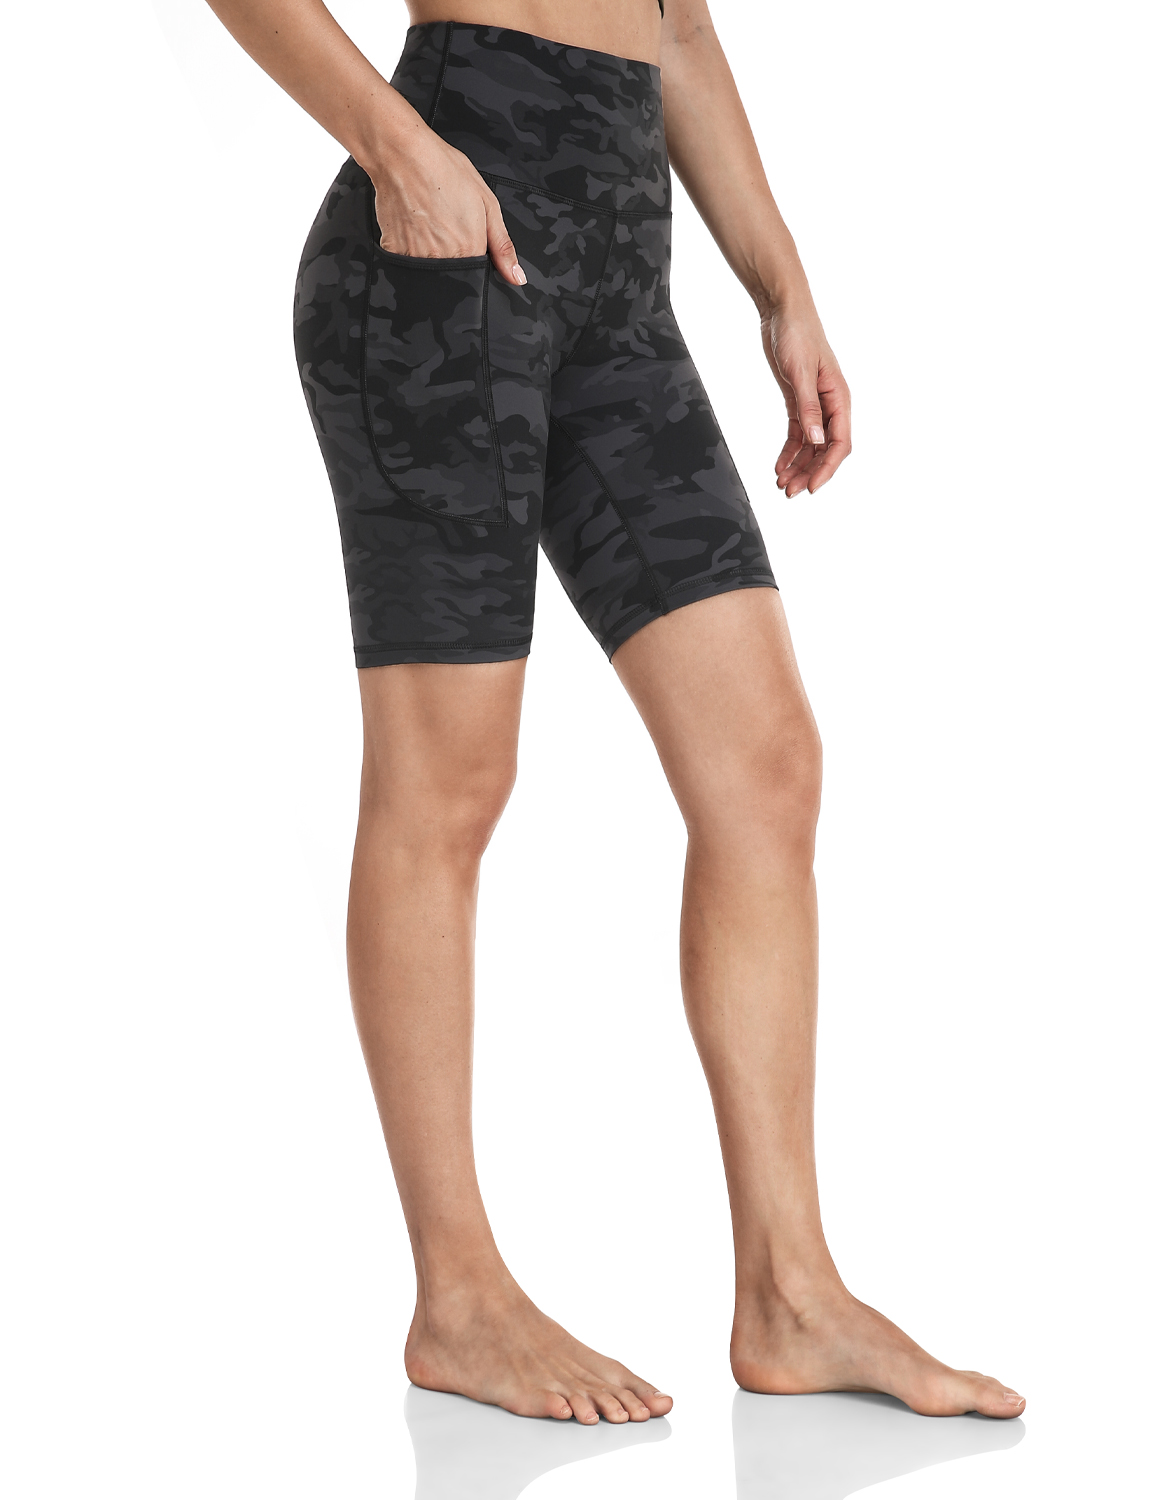 Up To 83% Off on Biker Shorts for Women Yoga C